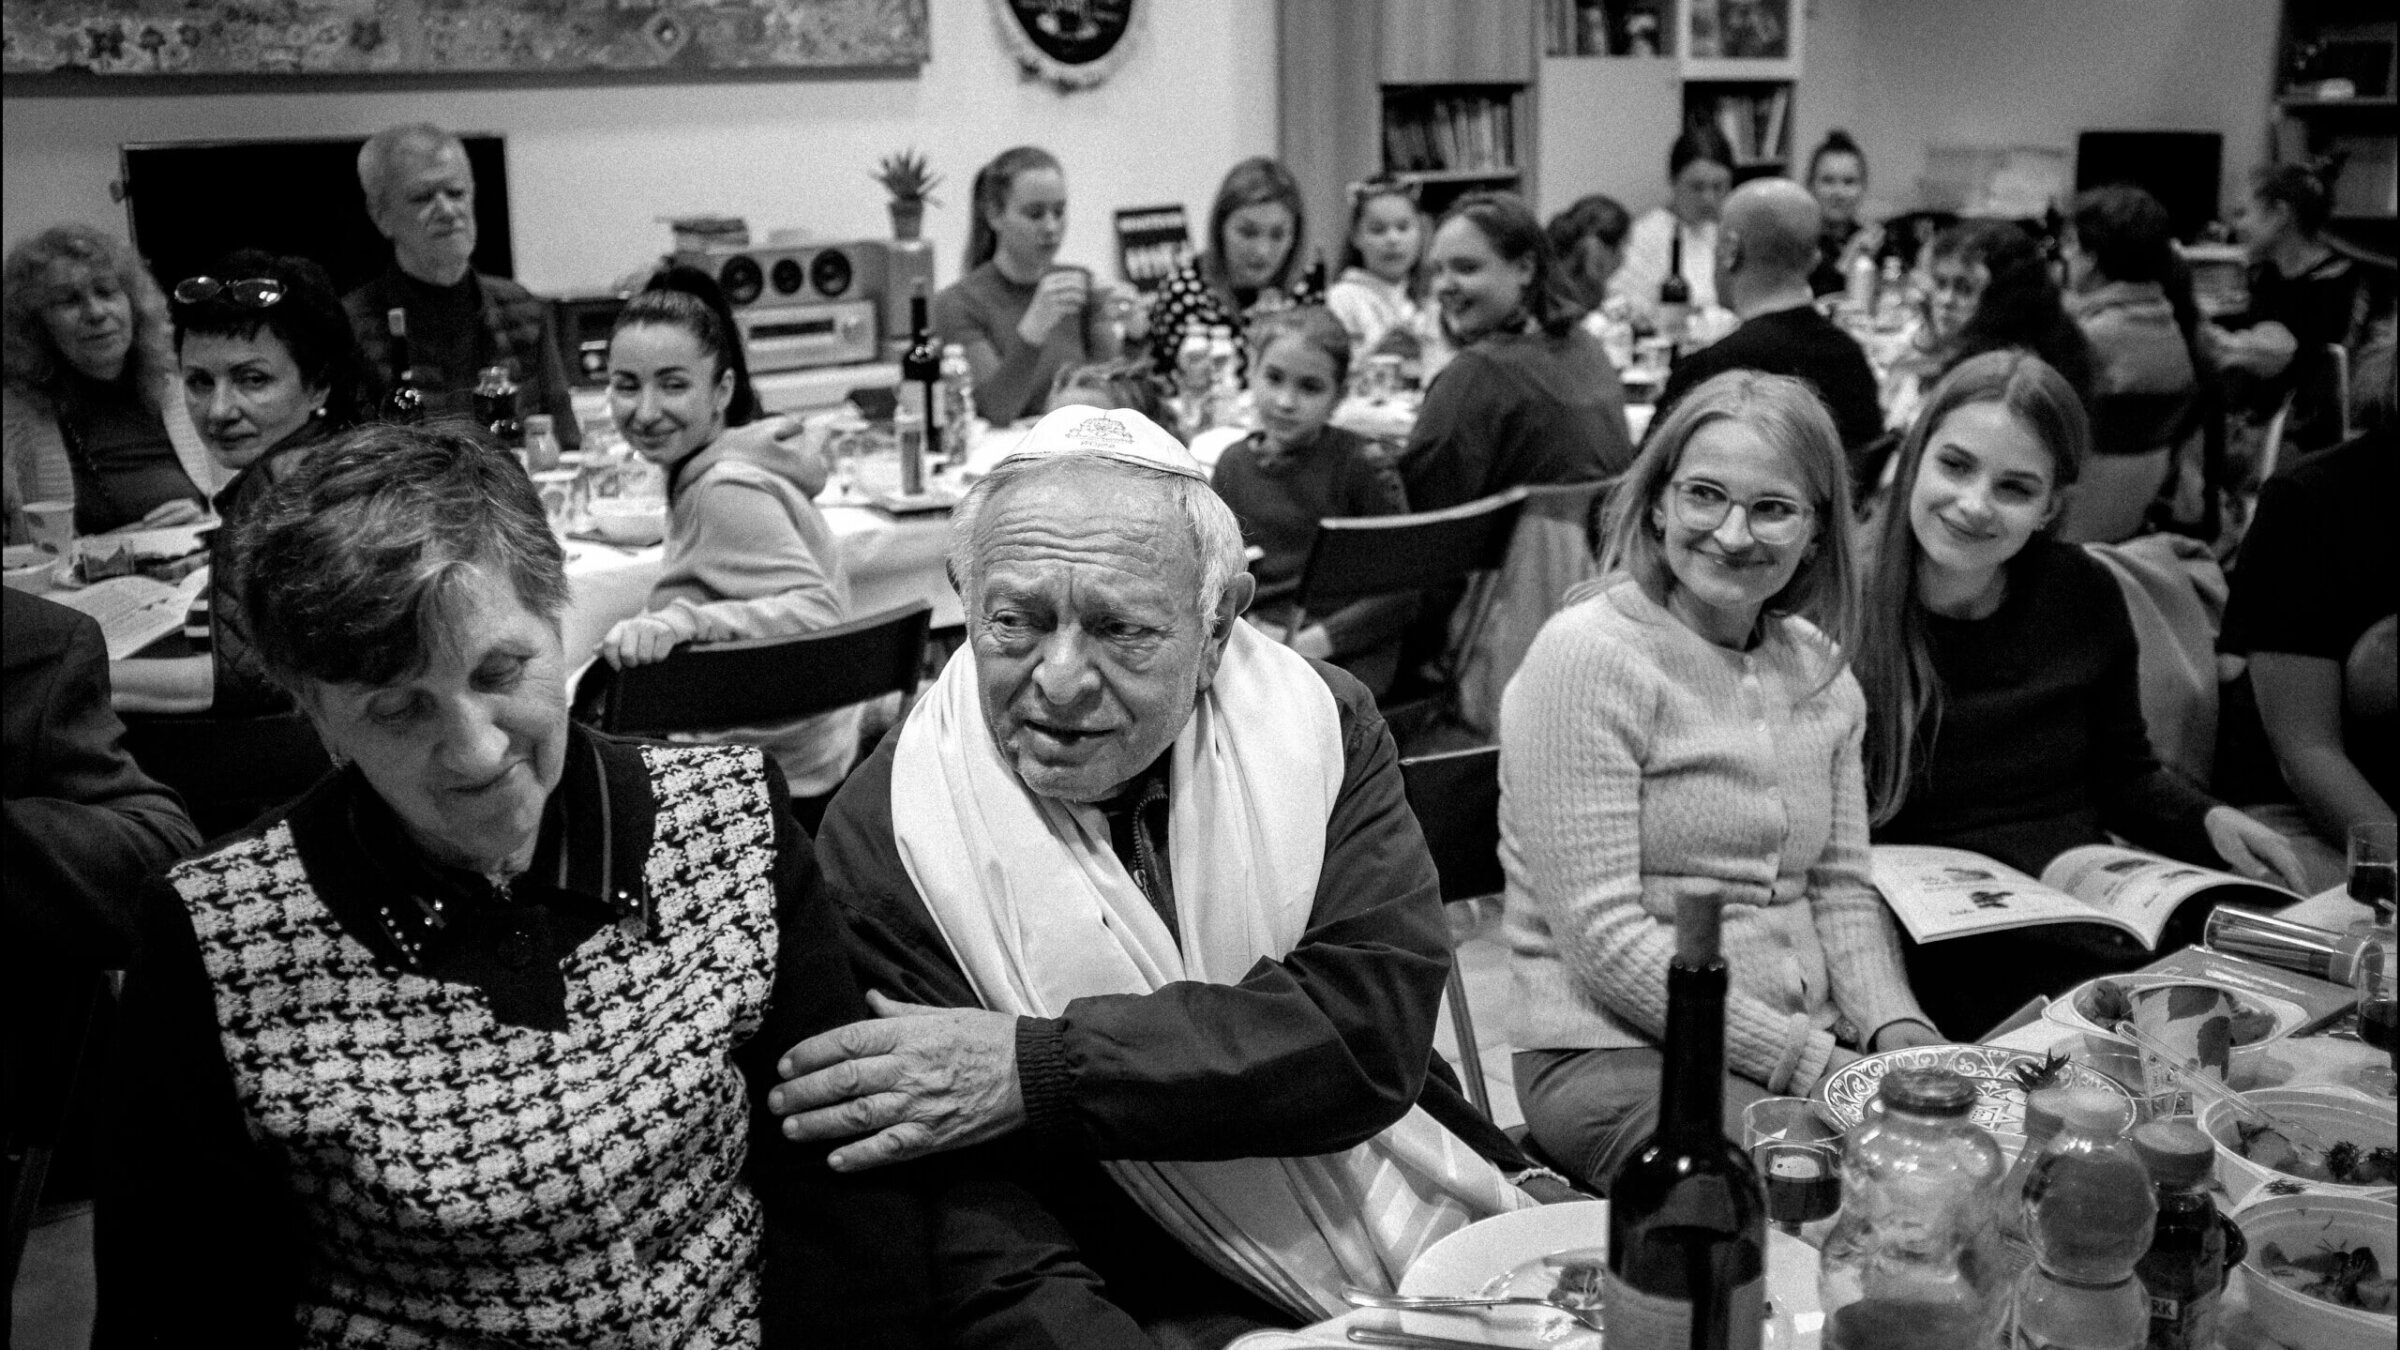 Yaakov Tamarkin, 77, wearing tallit, from Vasylkiv, Ukraine. Next to him is wife of 52 years, Svetlana; on other side is his daughter-in-law, Galina, (glasses) and her daughter. The family is attending a Ukrainian refugee Passover seder at JCC Krakow, April 15, 2022.